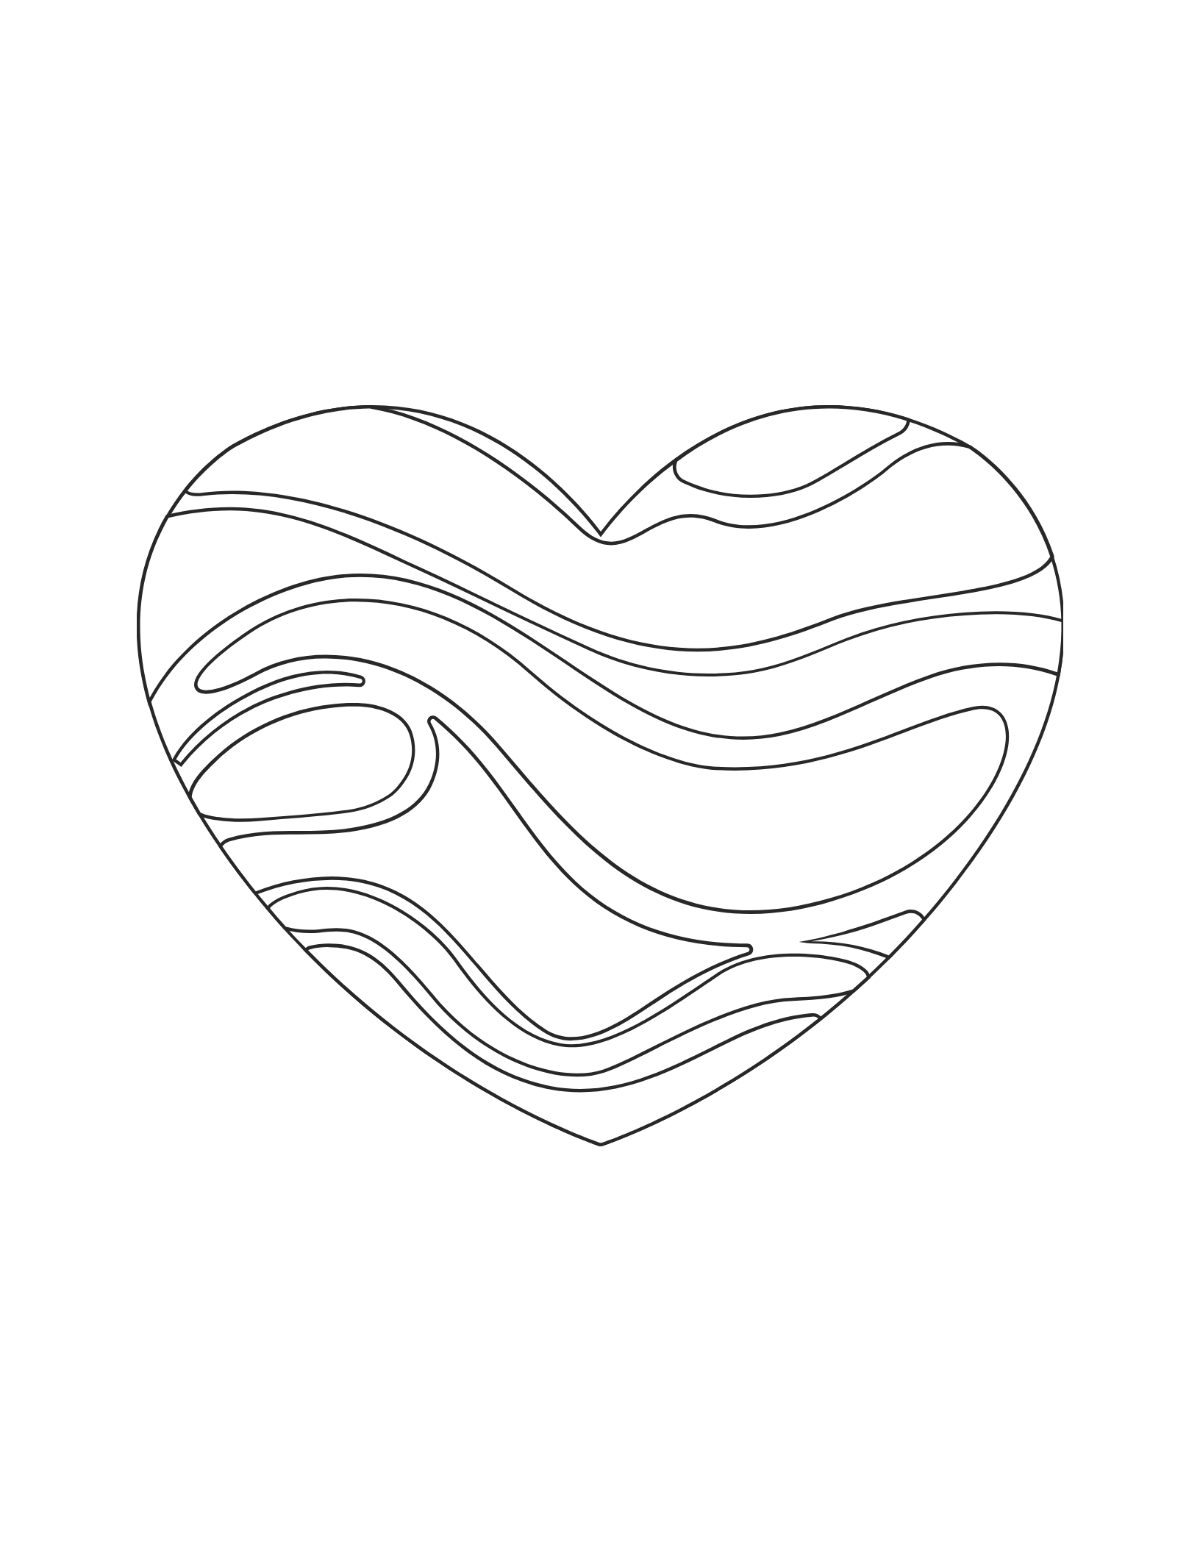 Black Heart Coloring Page Template